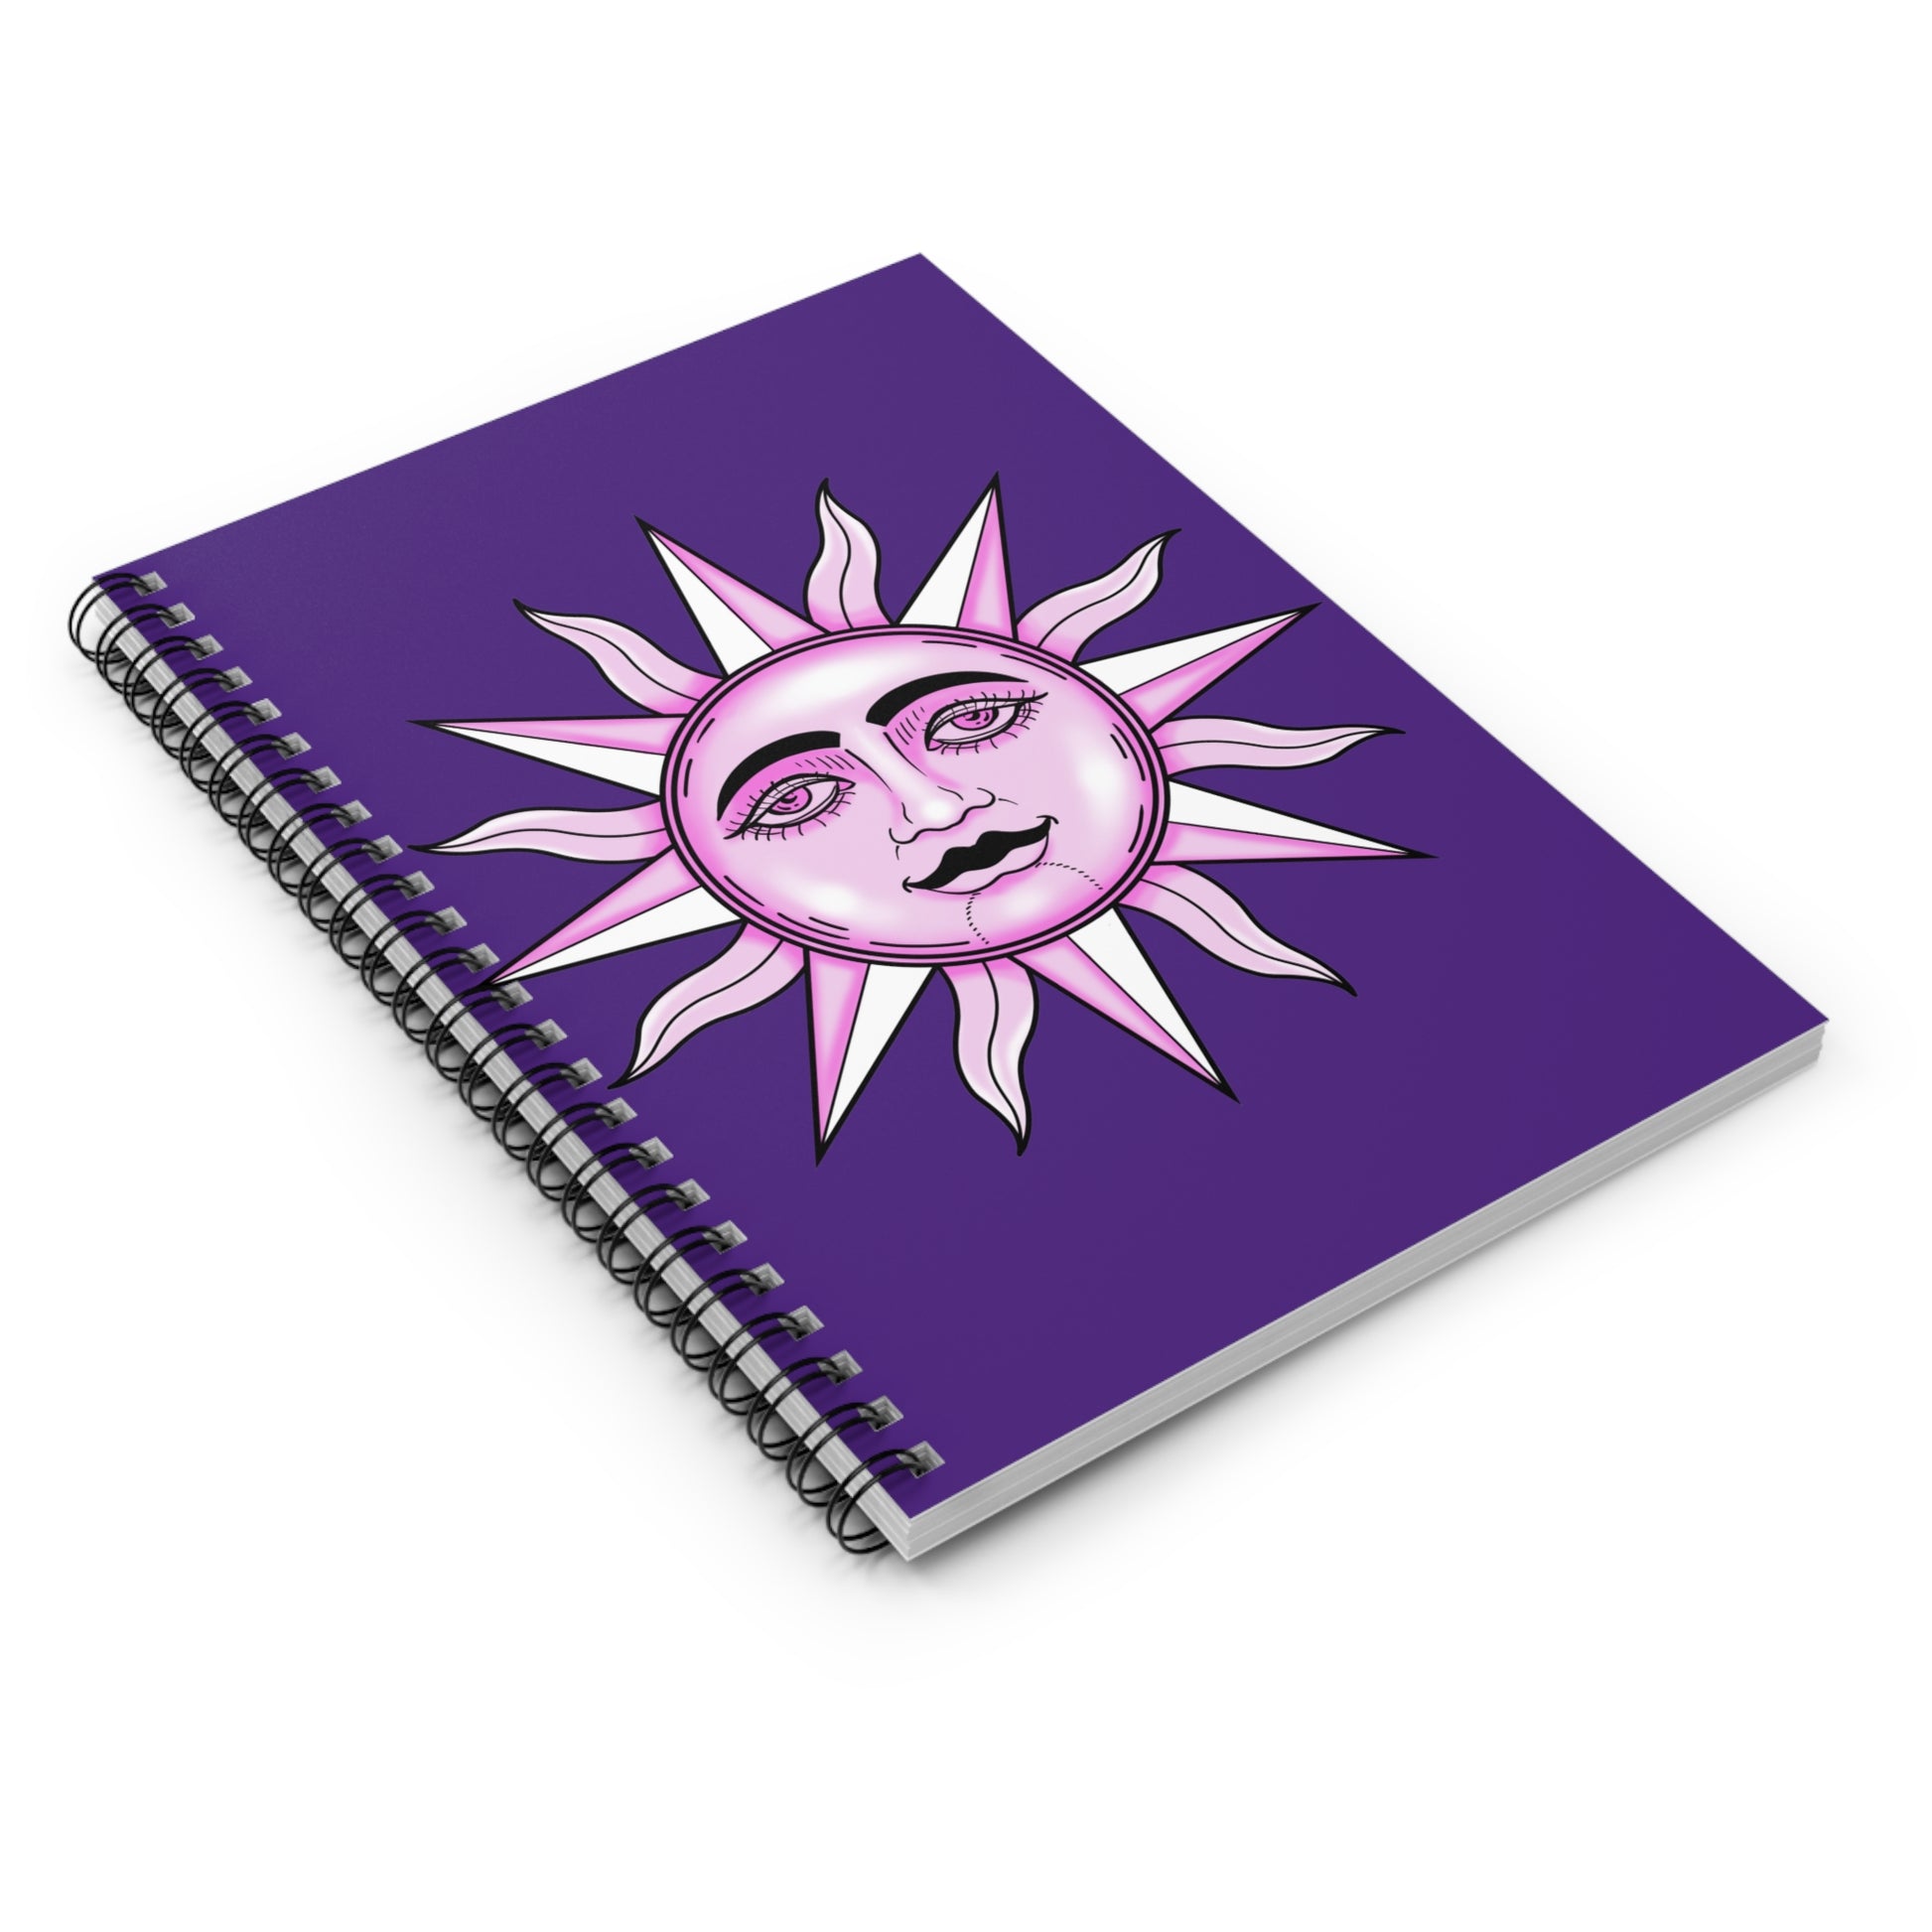 Sun God Goddess - I Love You: Spiral Notebook - Log Books - Journals - Diaries - and More Custom Printed by TheGlassyLass